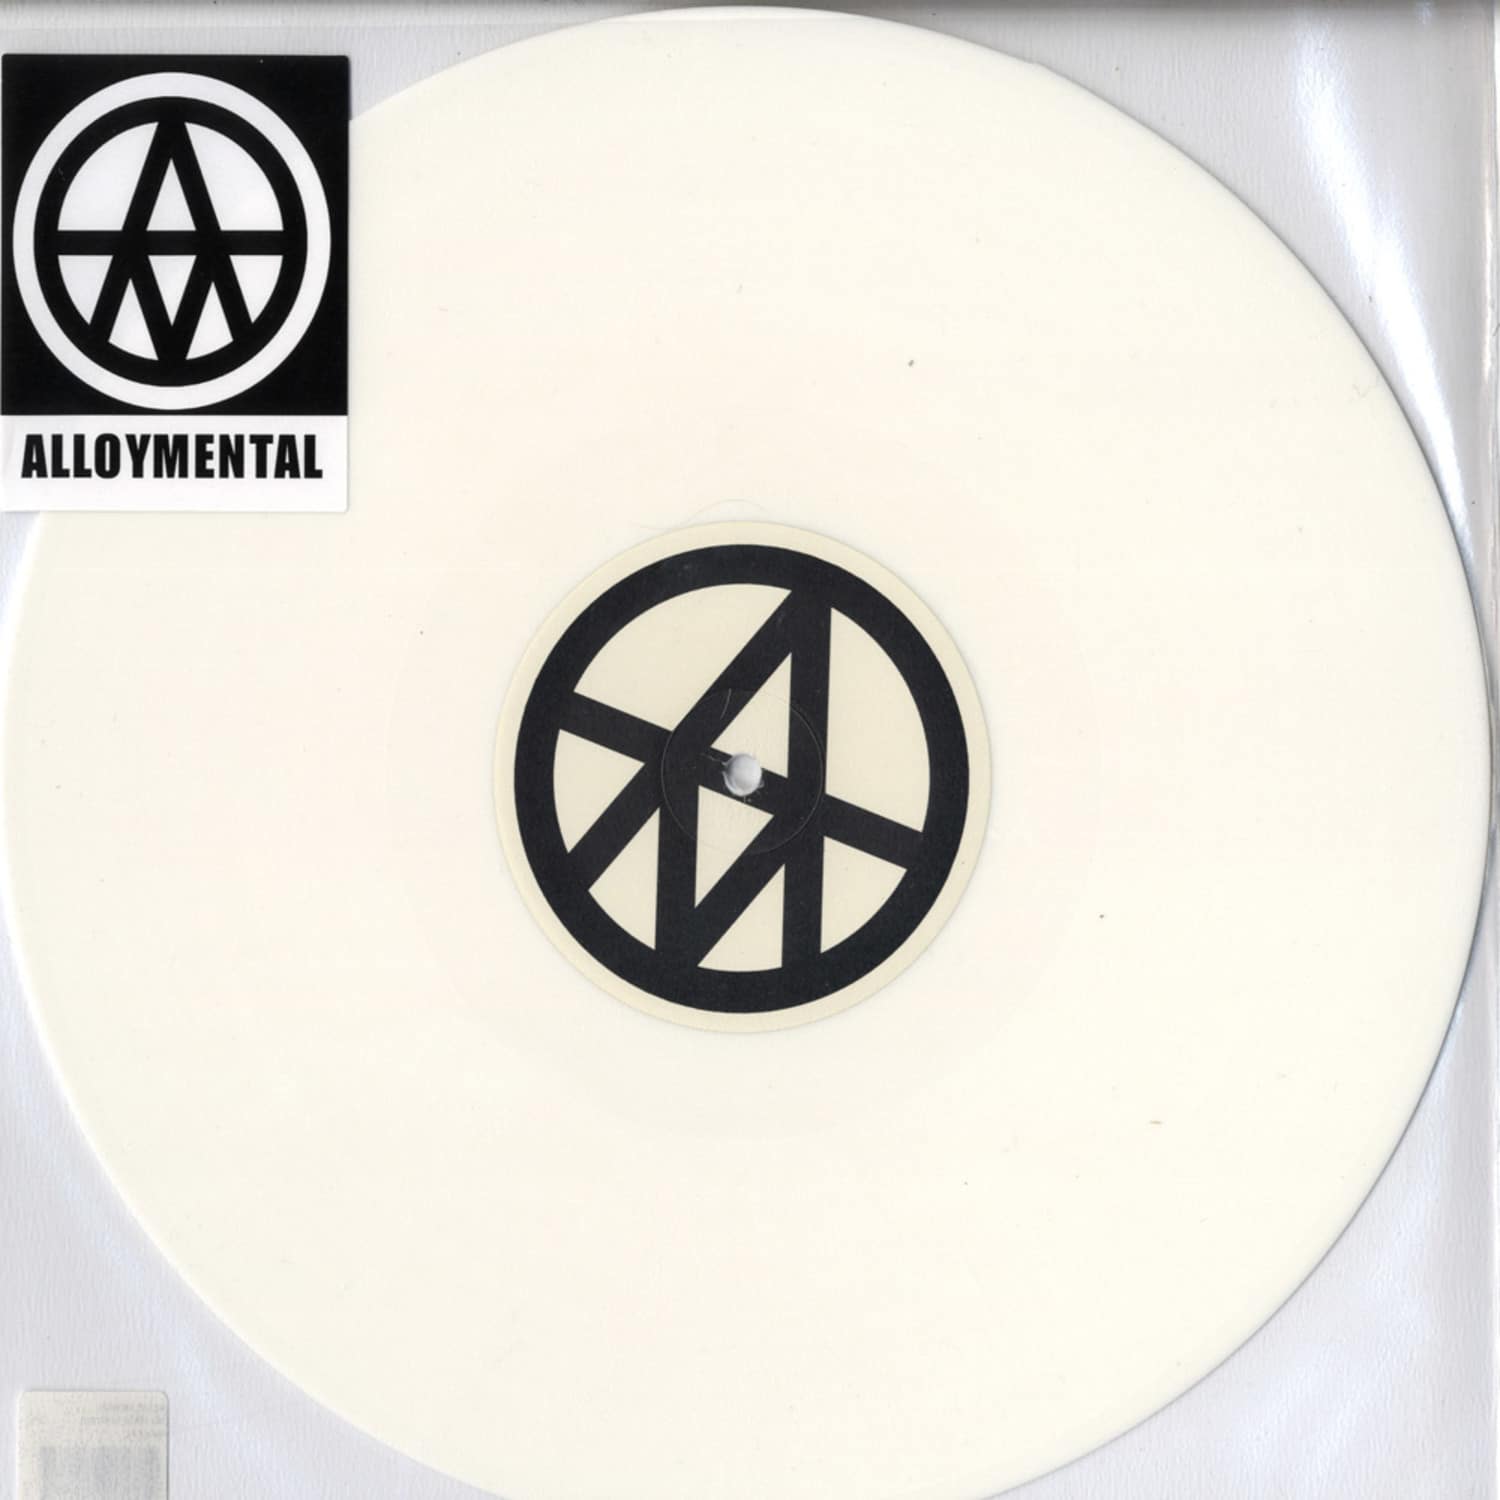 Alloy Mental - WE HAVE CONTROL